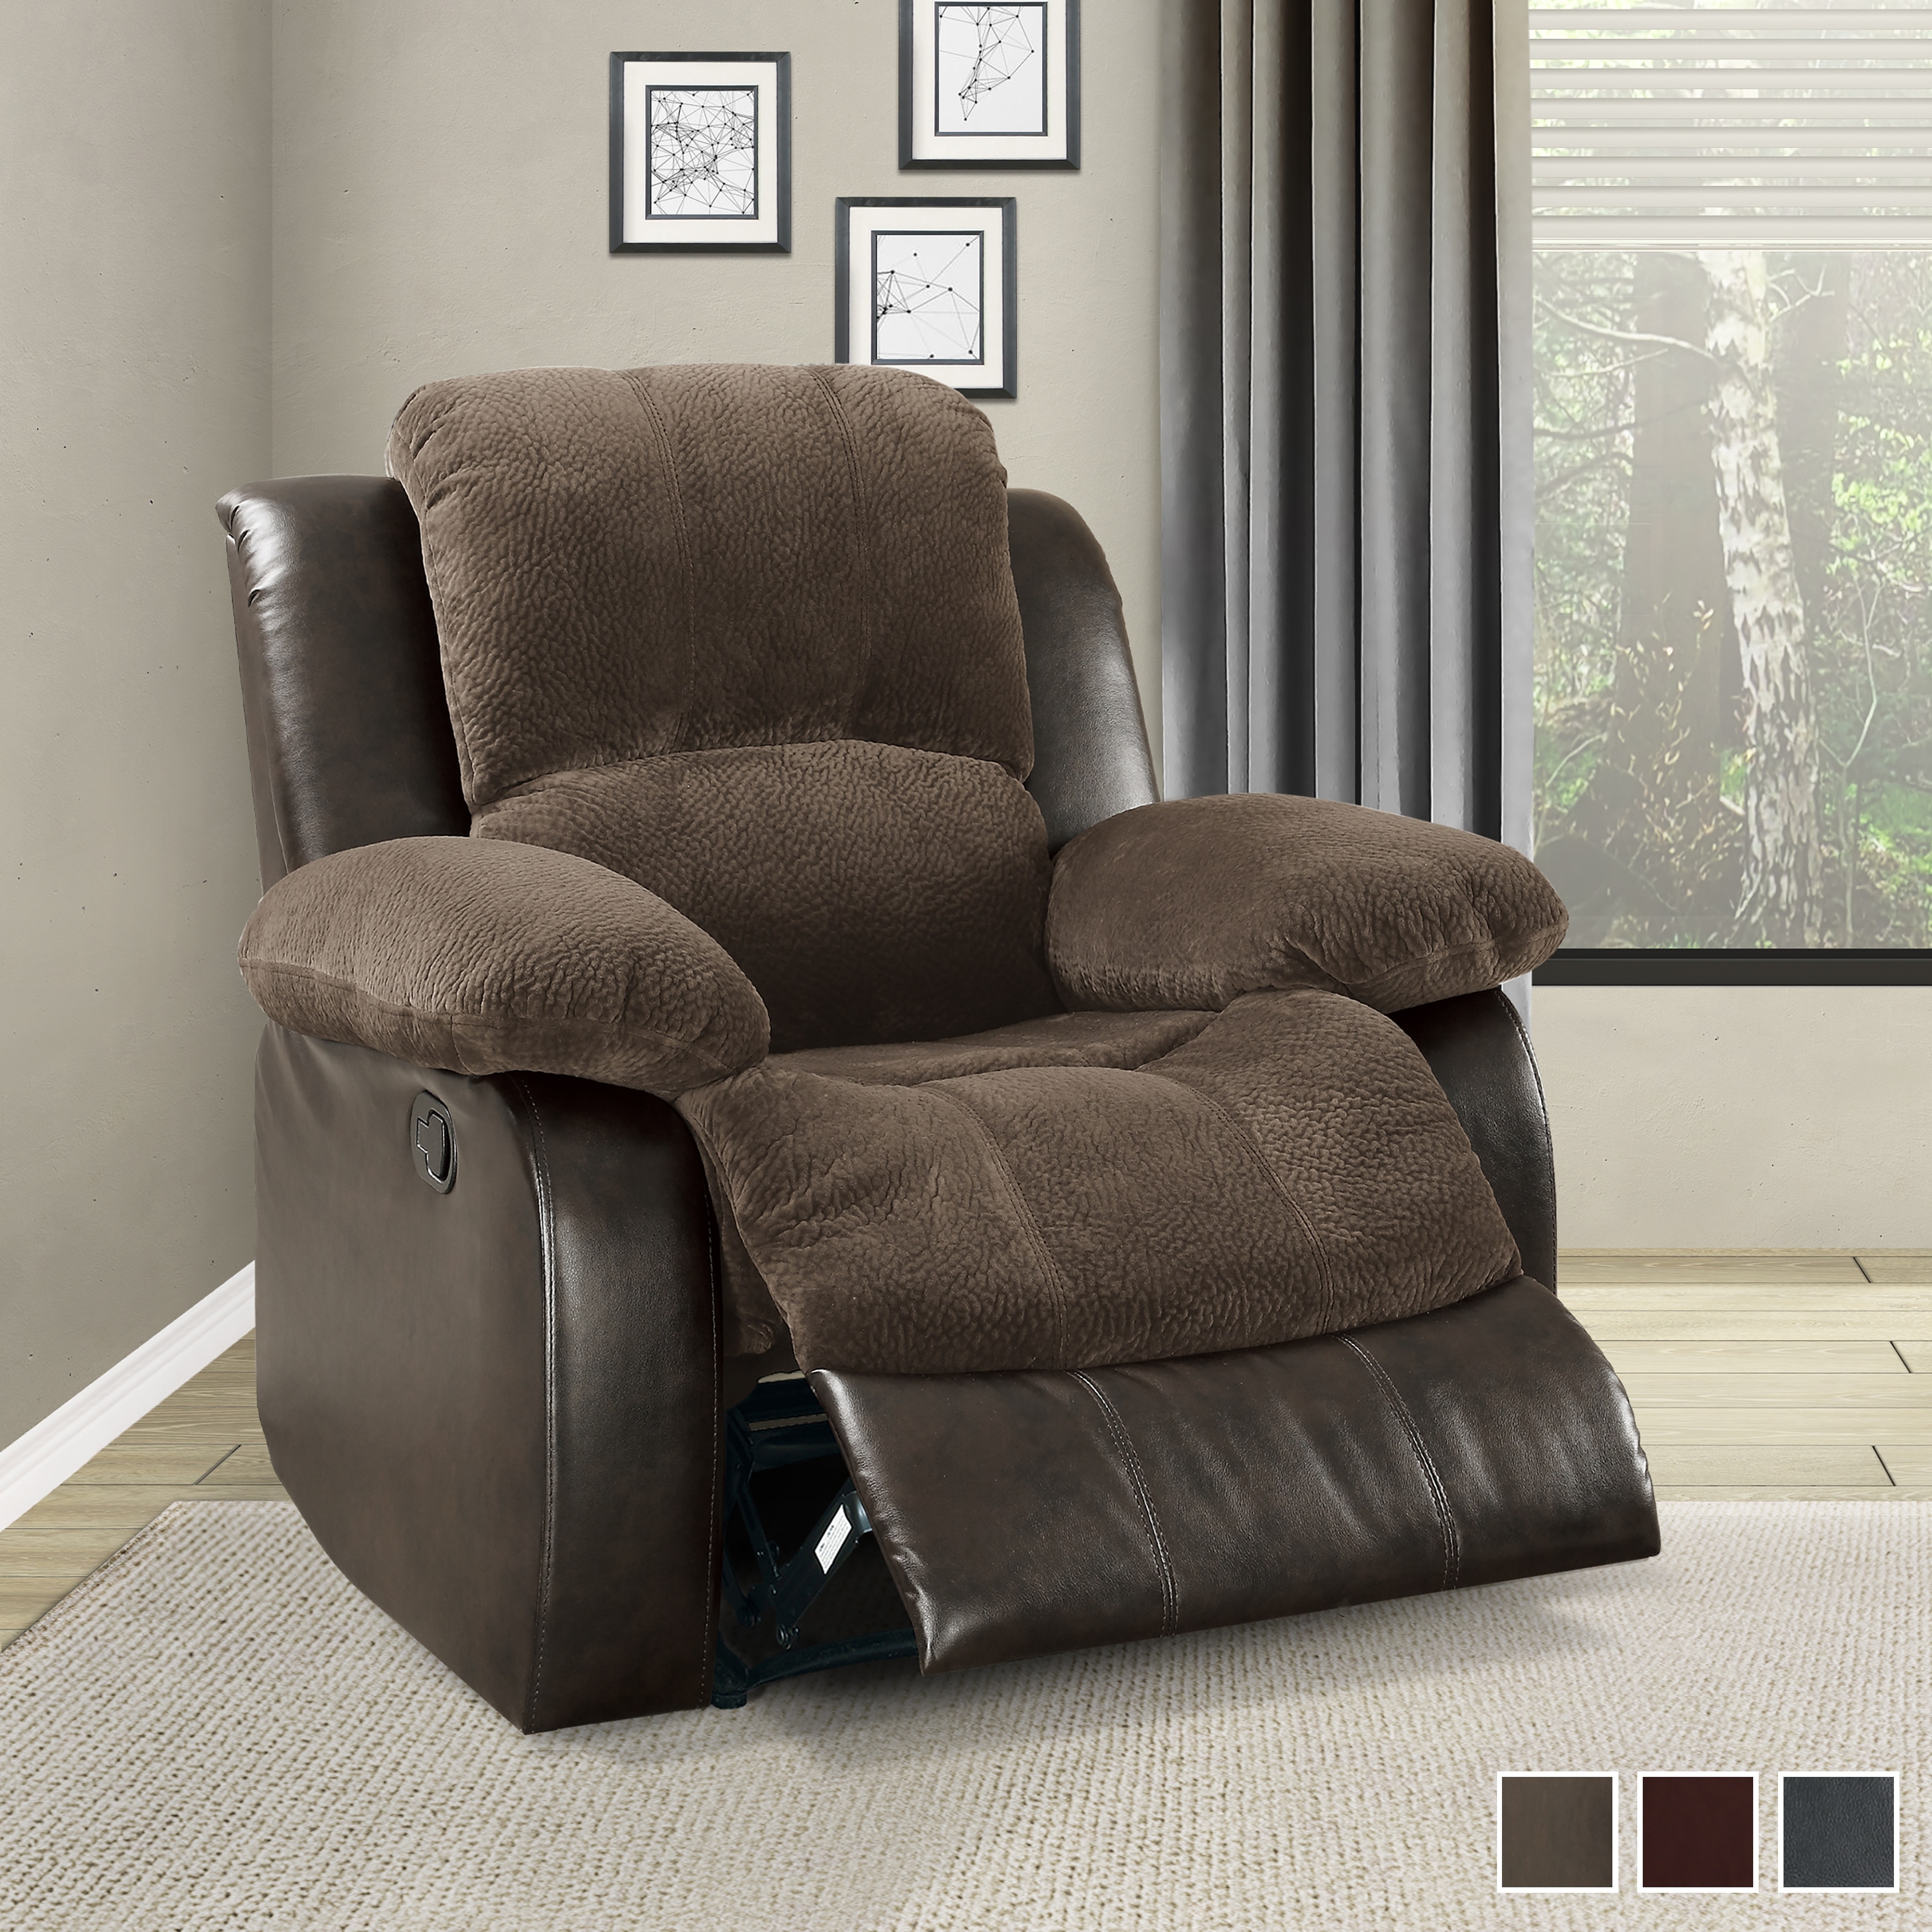 https://ak1.ostkcdn.com/images/products/is/images/direct/49db359916491a67dd9d679a538c09775658671b/Lucca-Reclining-Chair.jpg